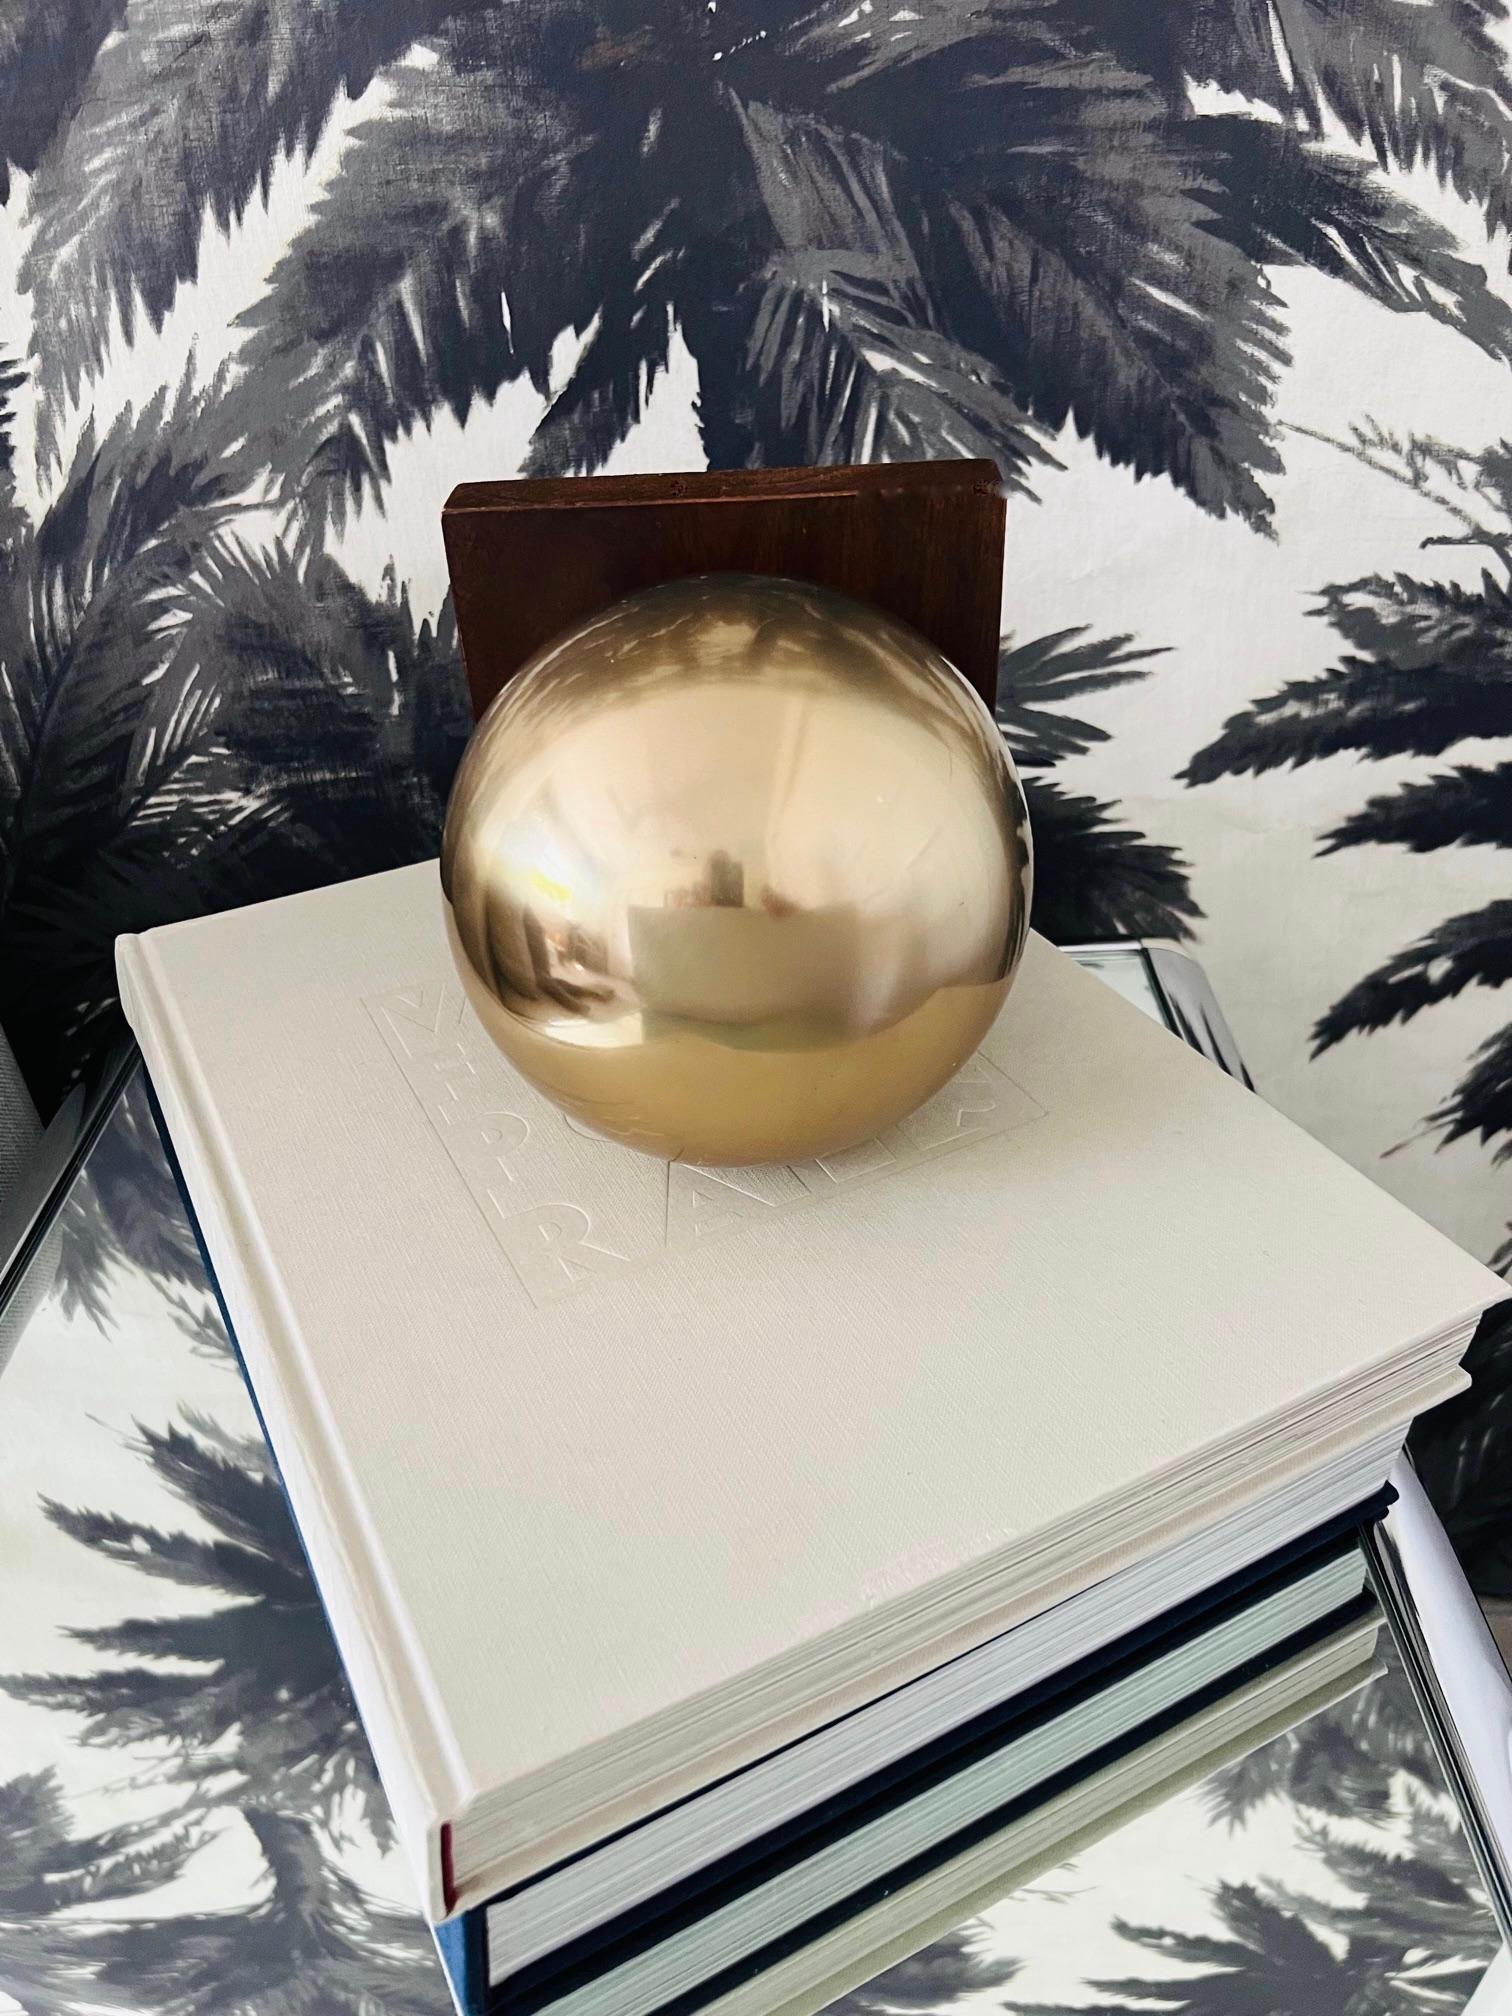 Mid-Century Modern Architectural Brass Globe Bookend & Decorative Object, 1970s For Sale 2